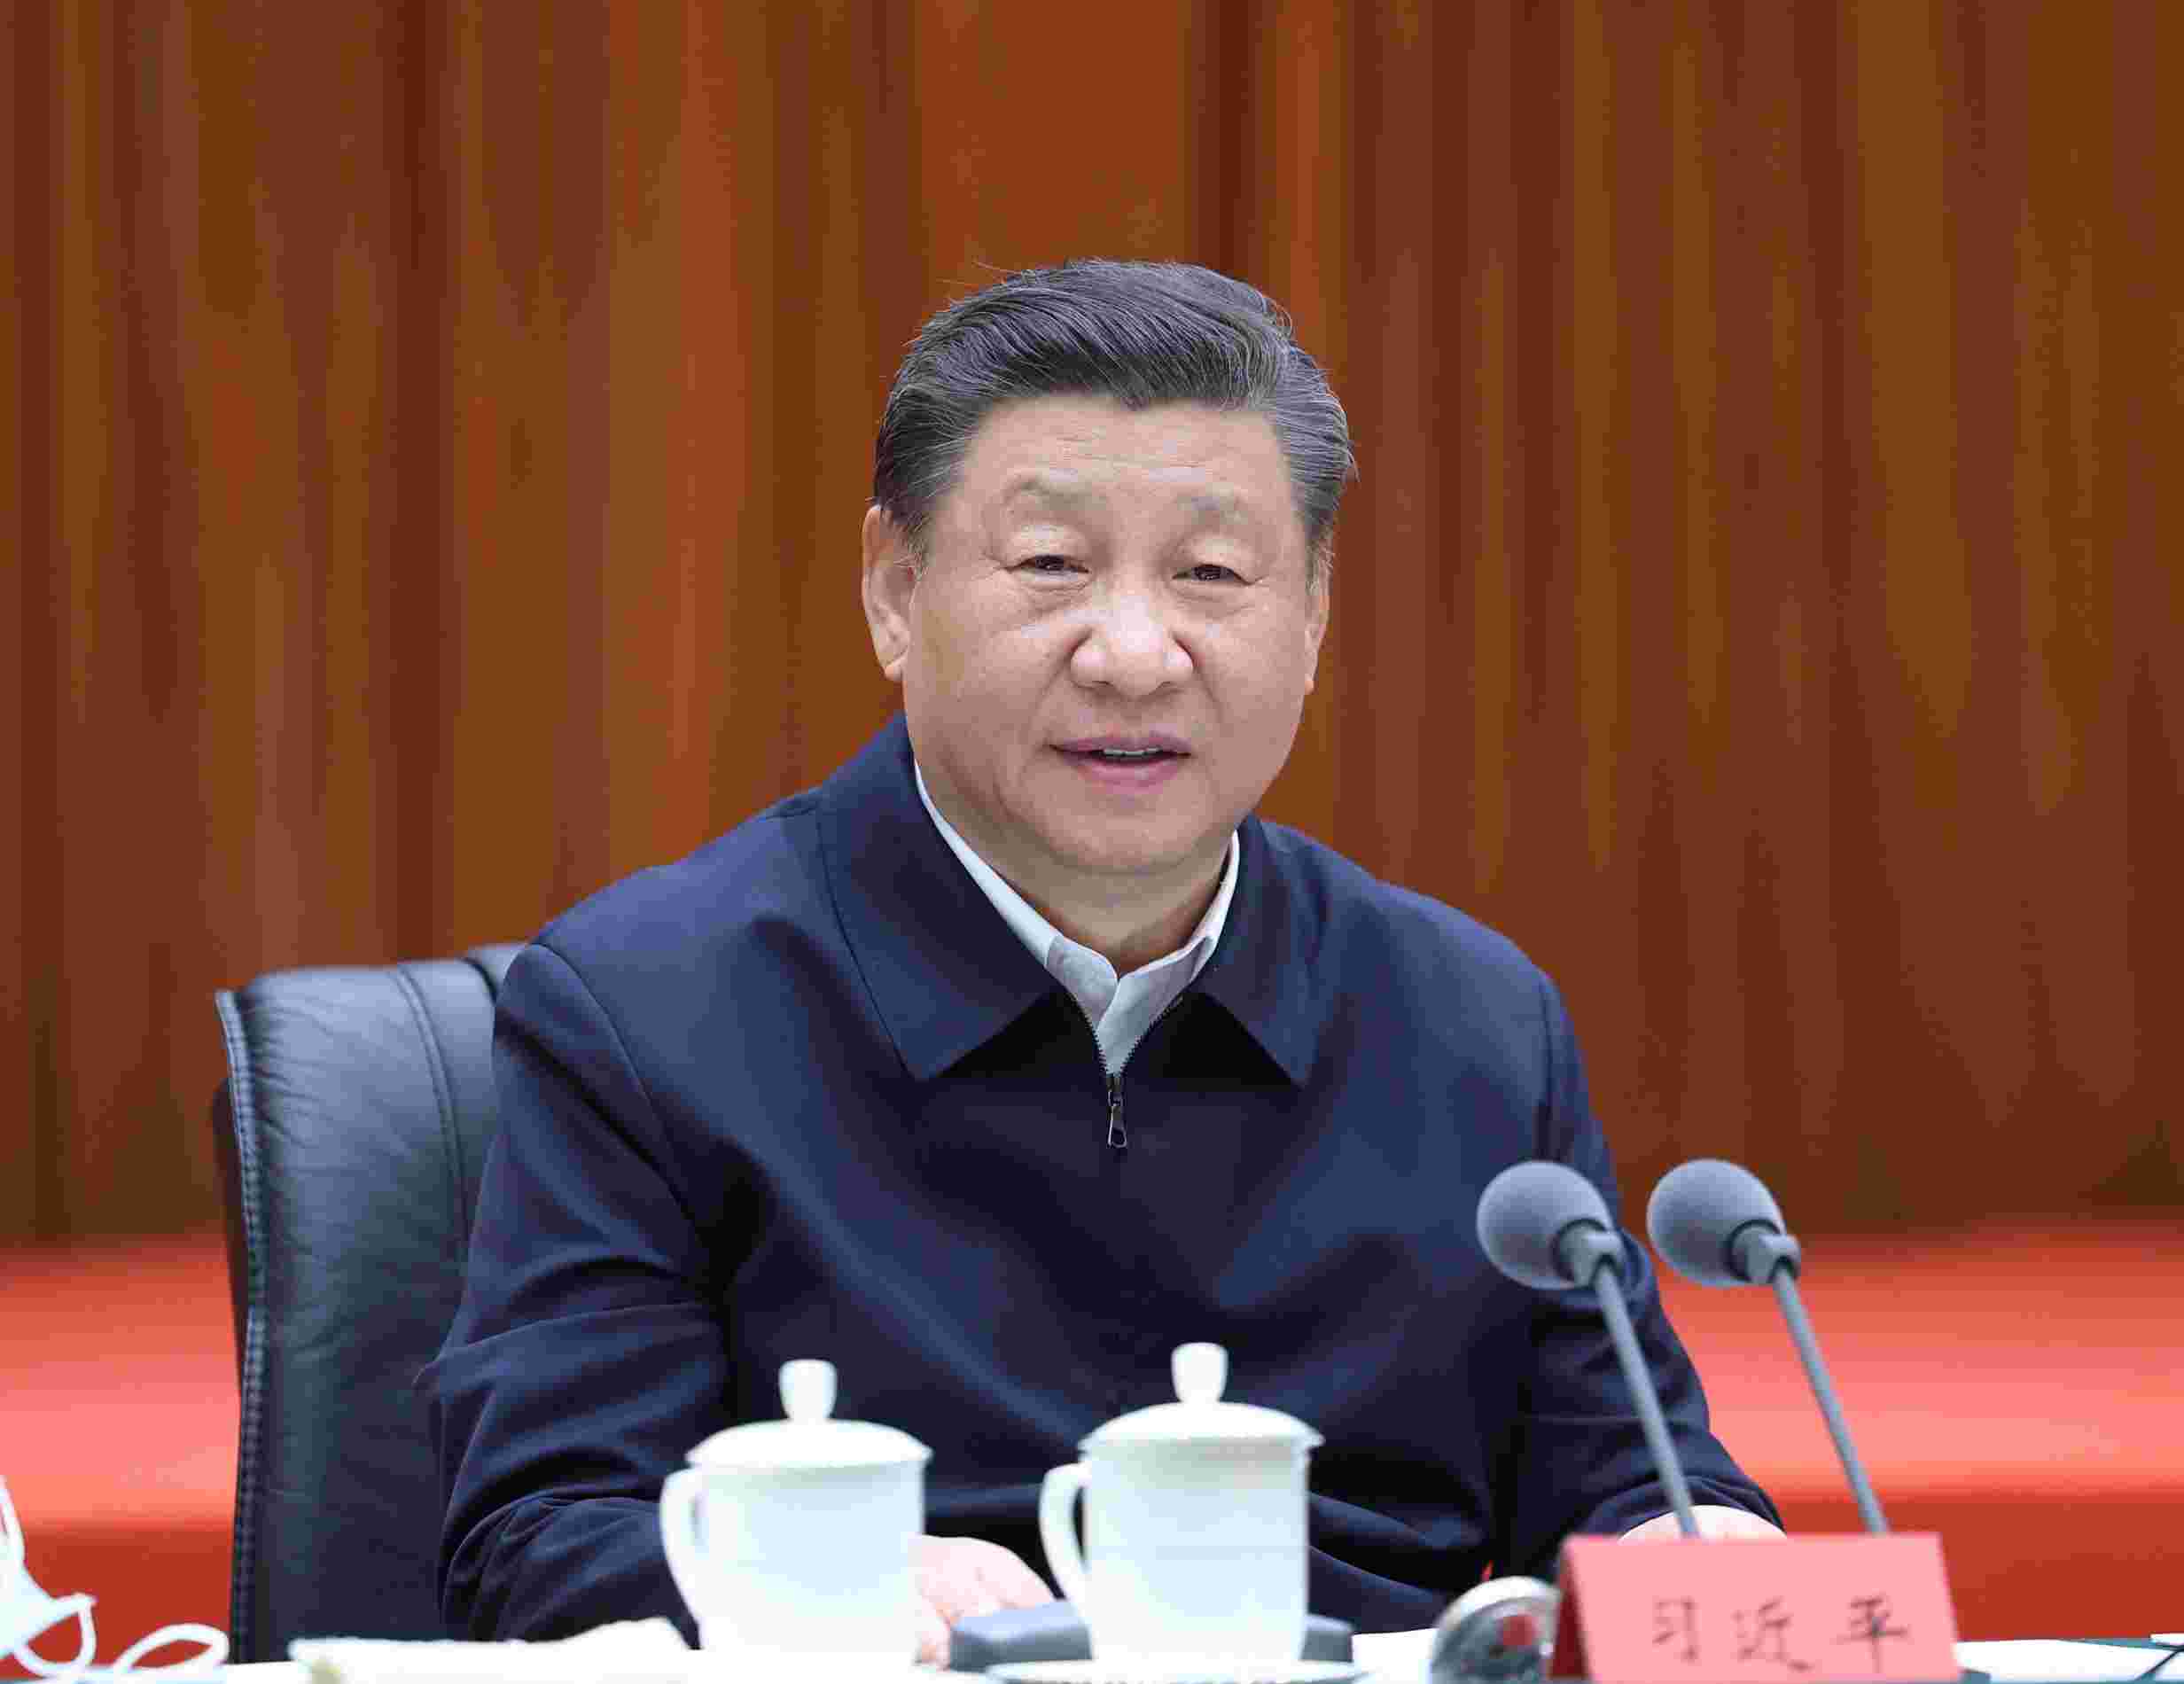 During his visit to Inner Mongolia, Xi Jinping stressed that he should grasp the strategic orientation, adhere to green development, and strive to write a new chapter of Chinese modernization in Inner Mongolia | Strategy | Inner Mongolia